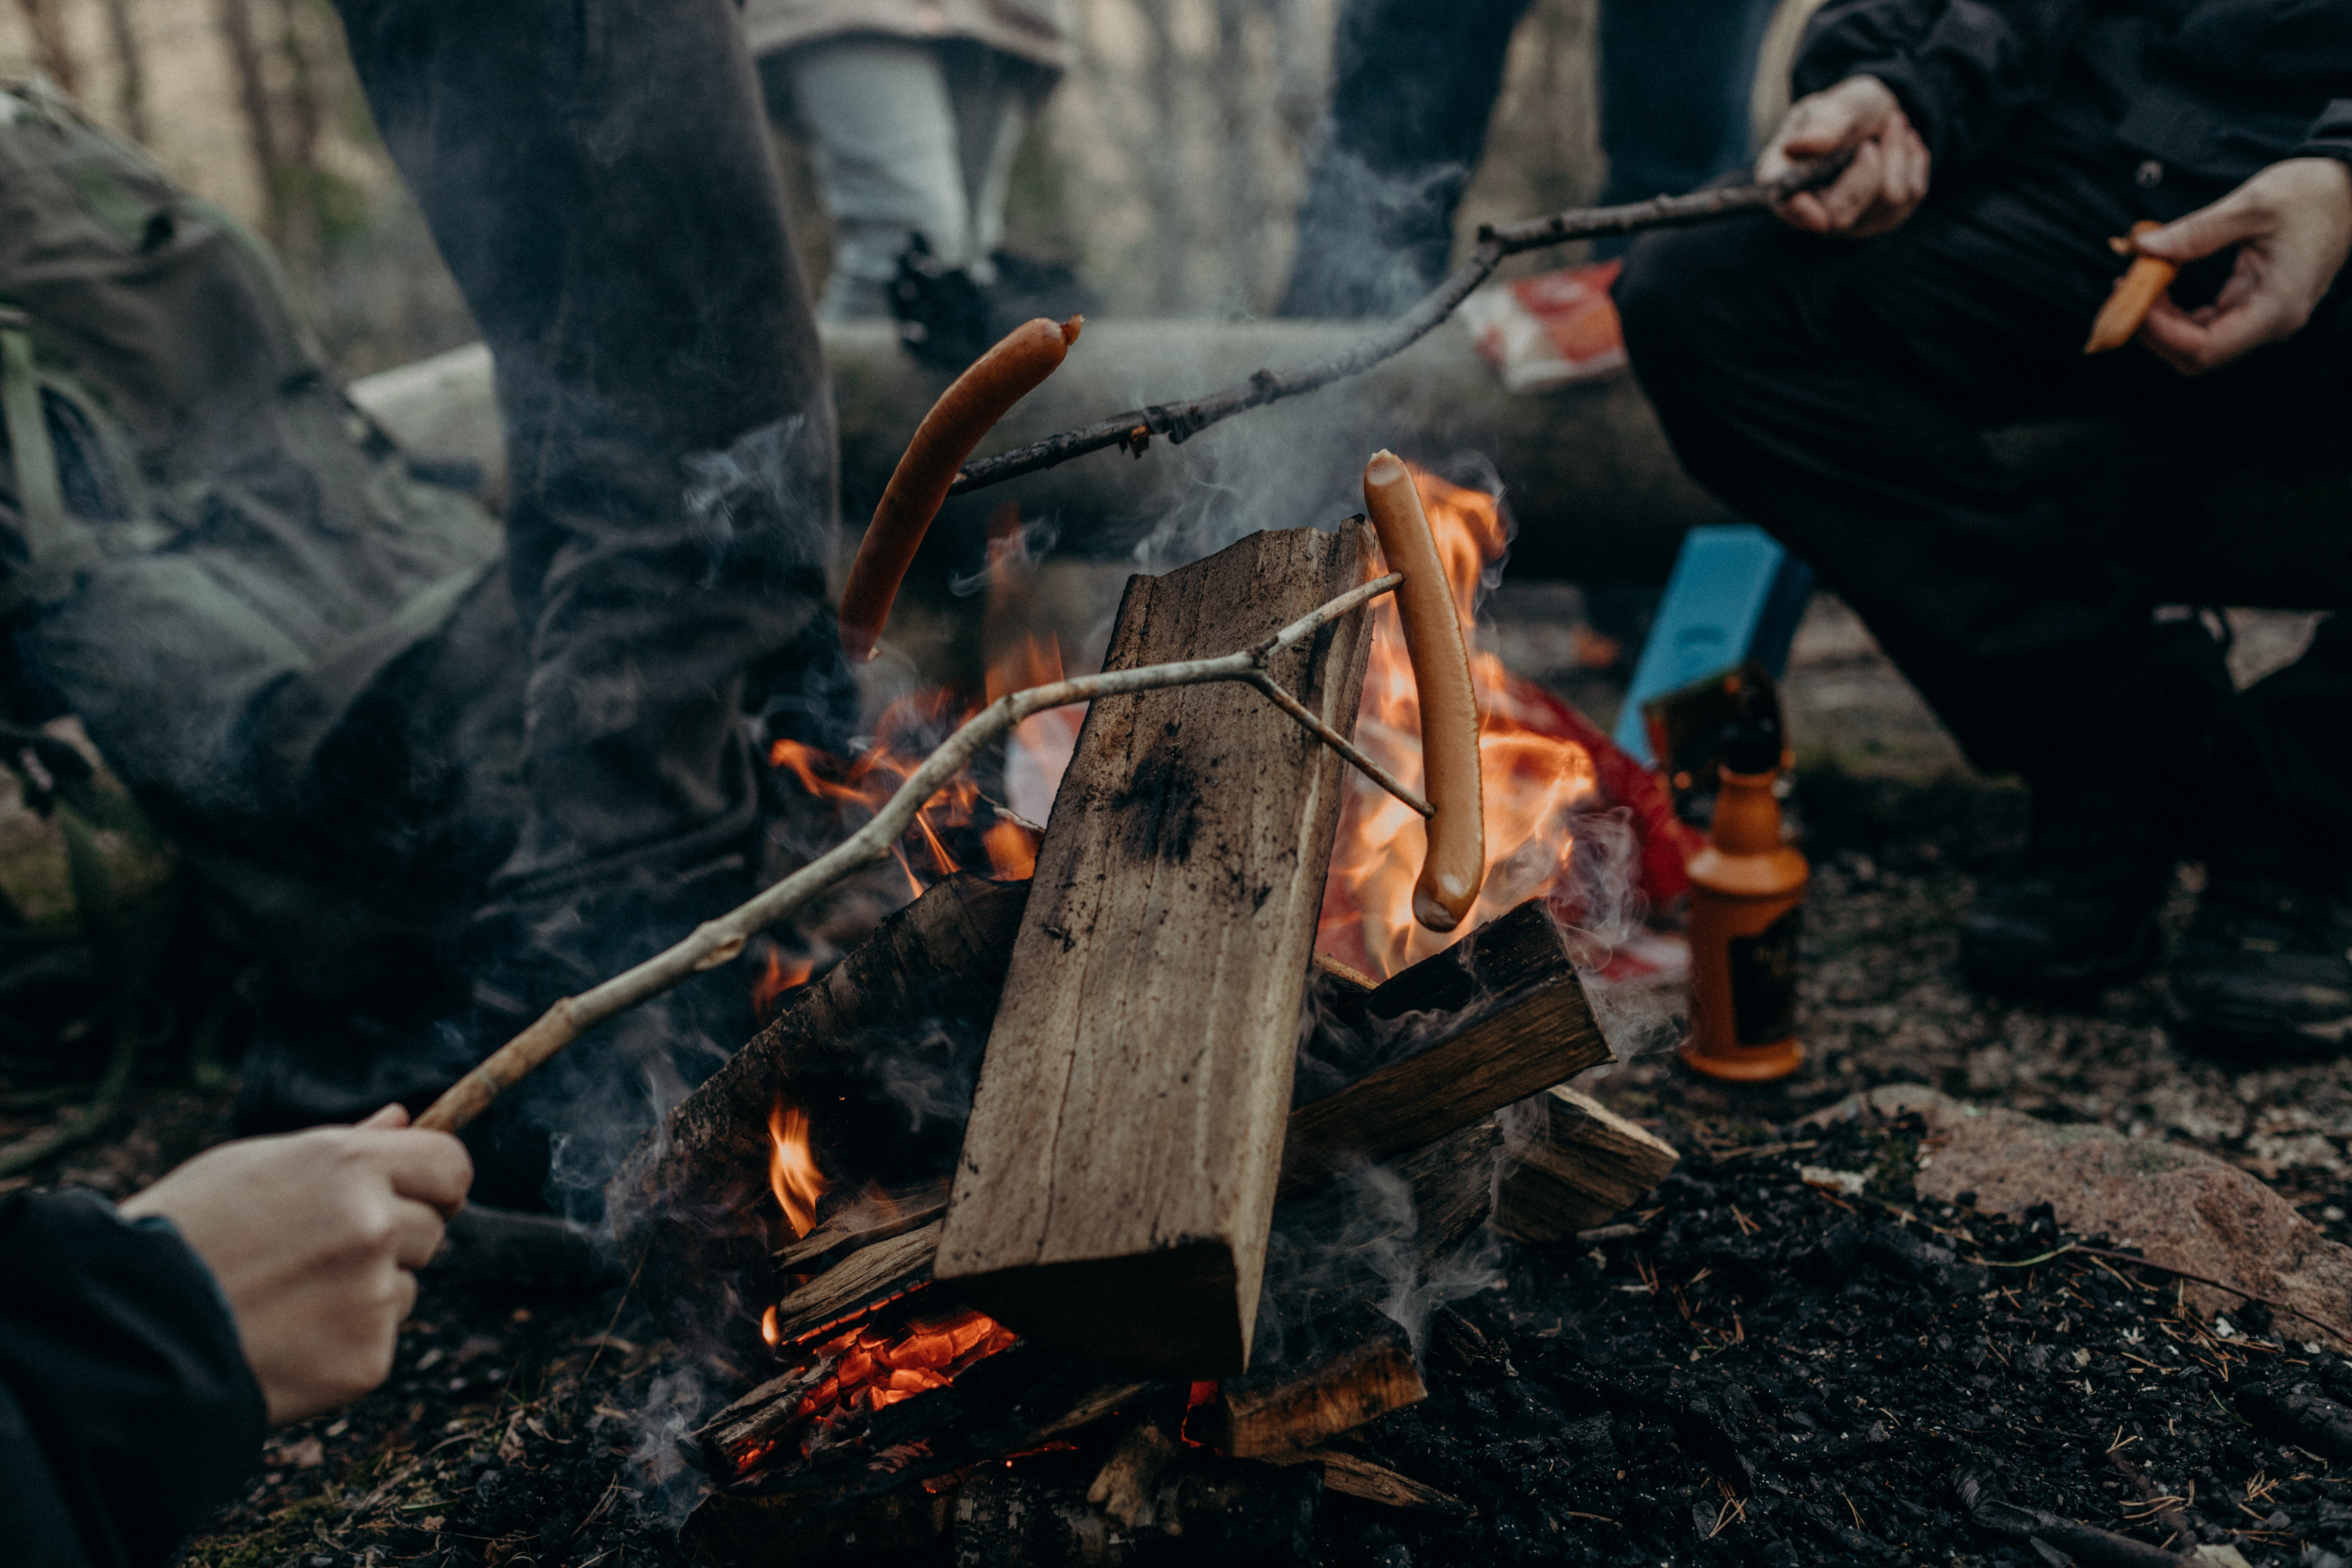 Camping is good recreational activity for family and friend groups | Photo by Nicolette Attree from Pexels